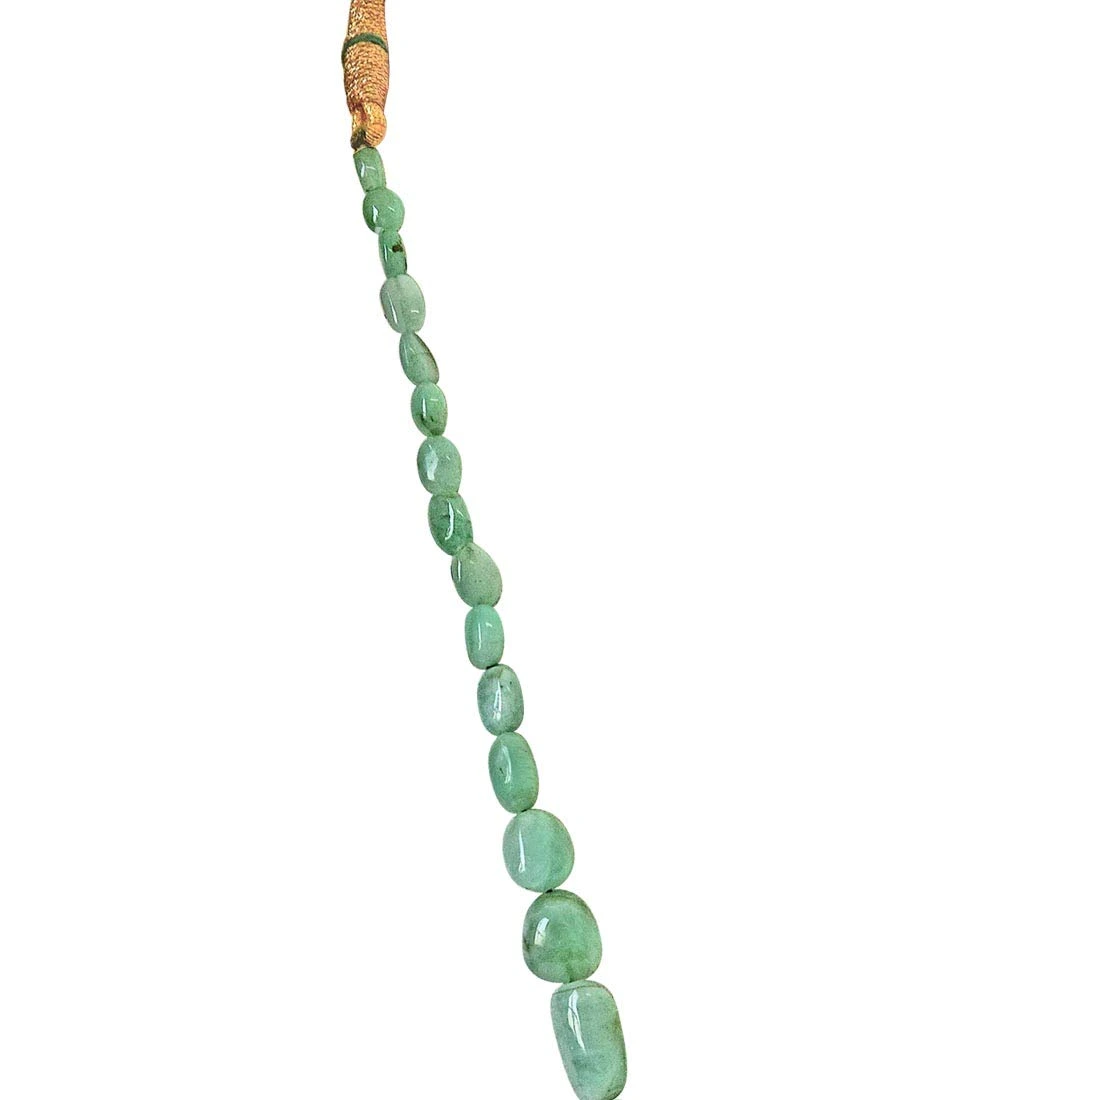 109.56cts Single Line Big Real Natural Light Green Oval Emerald Necklace for Women (109.56cts EMR Neck)